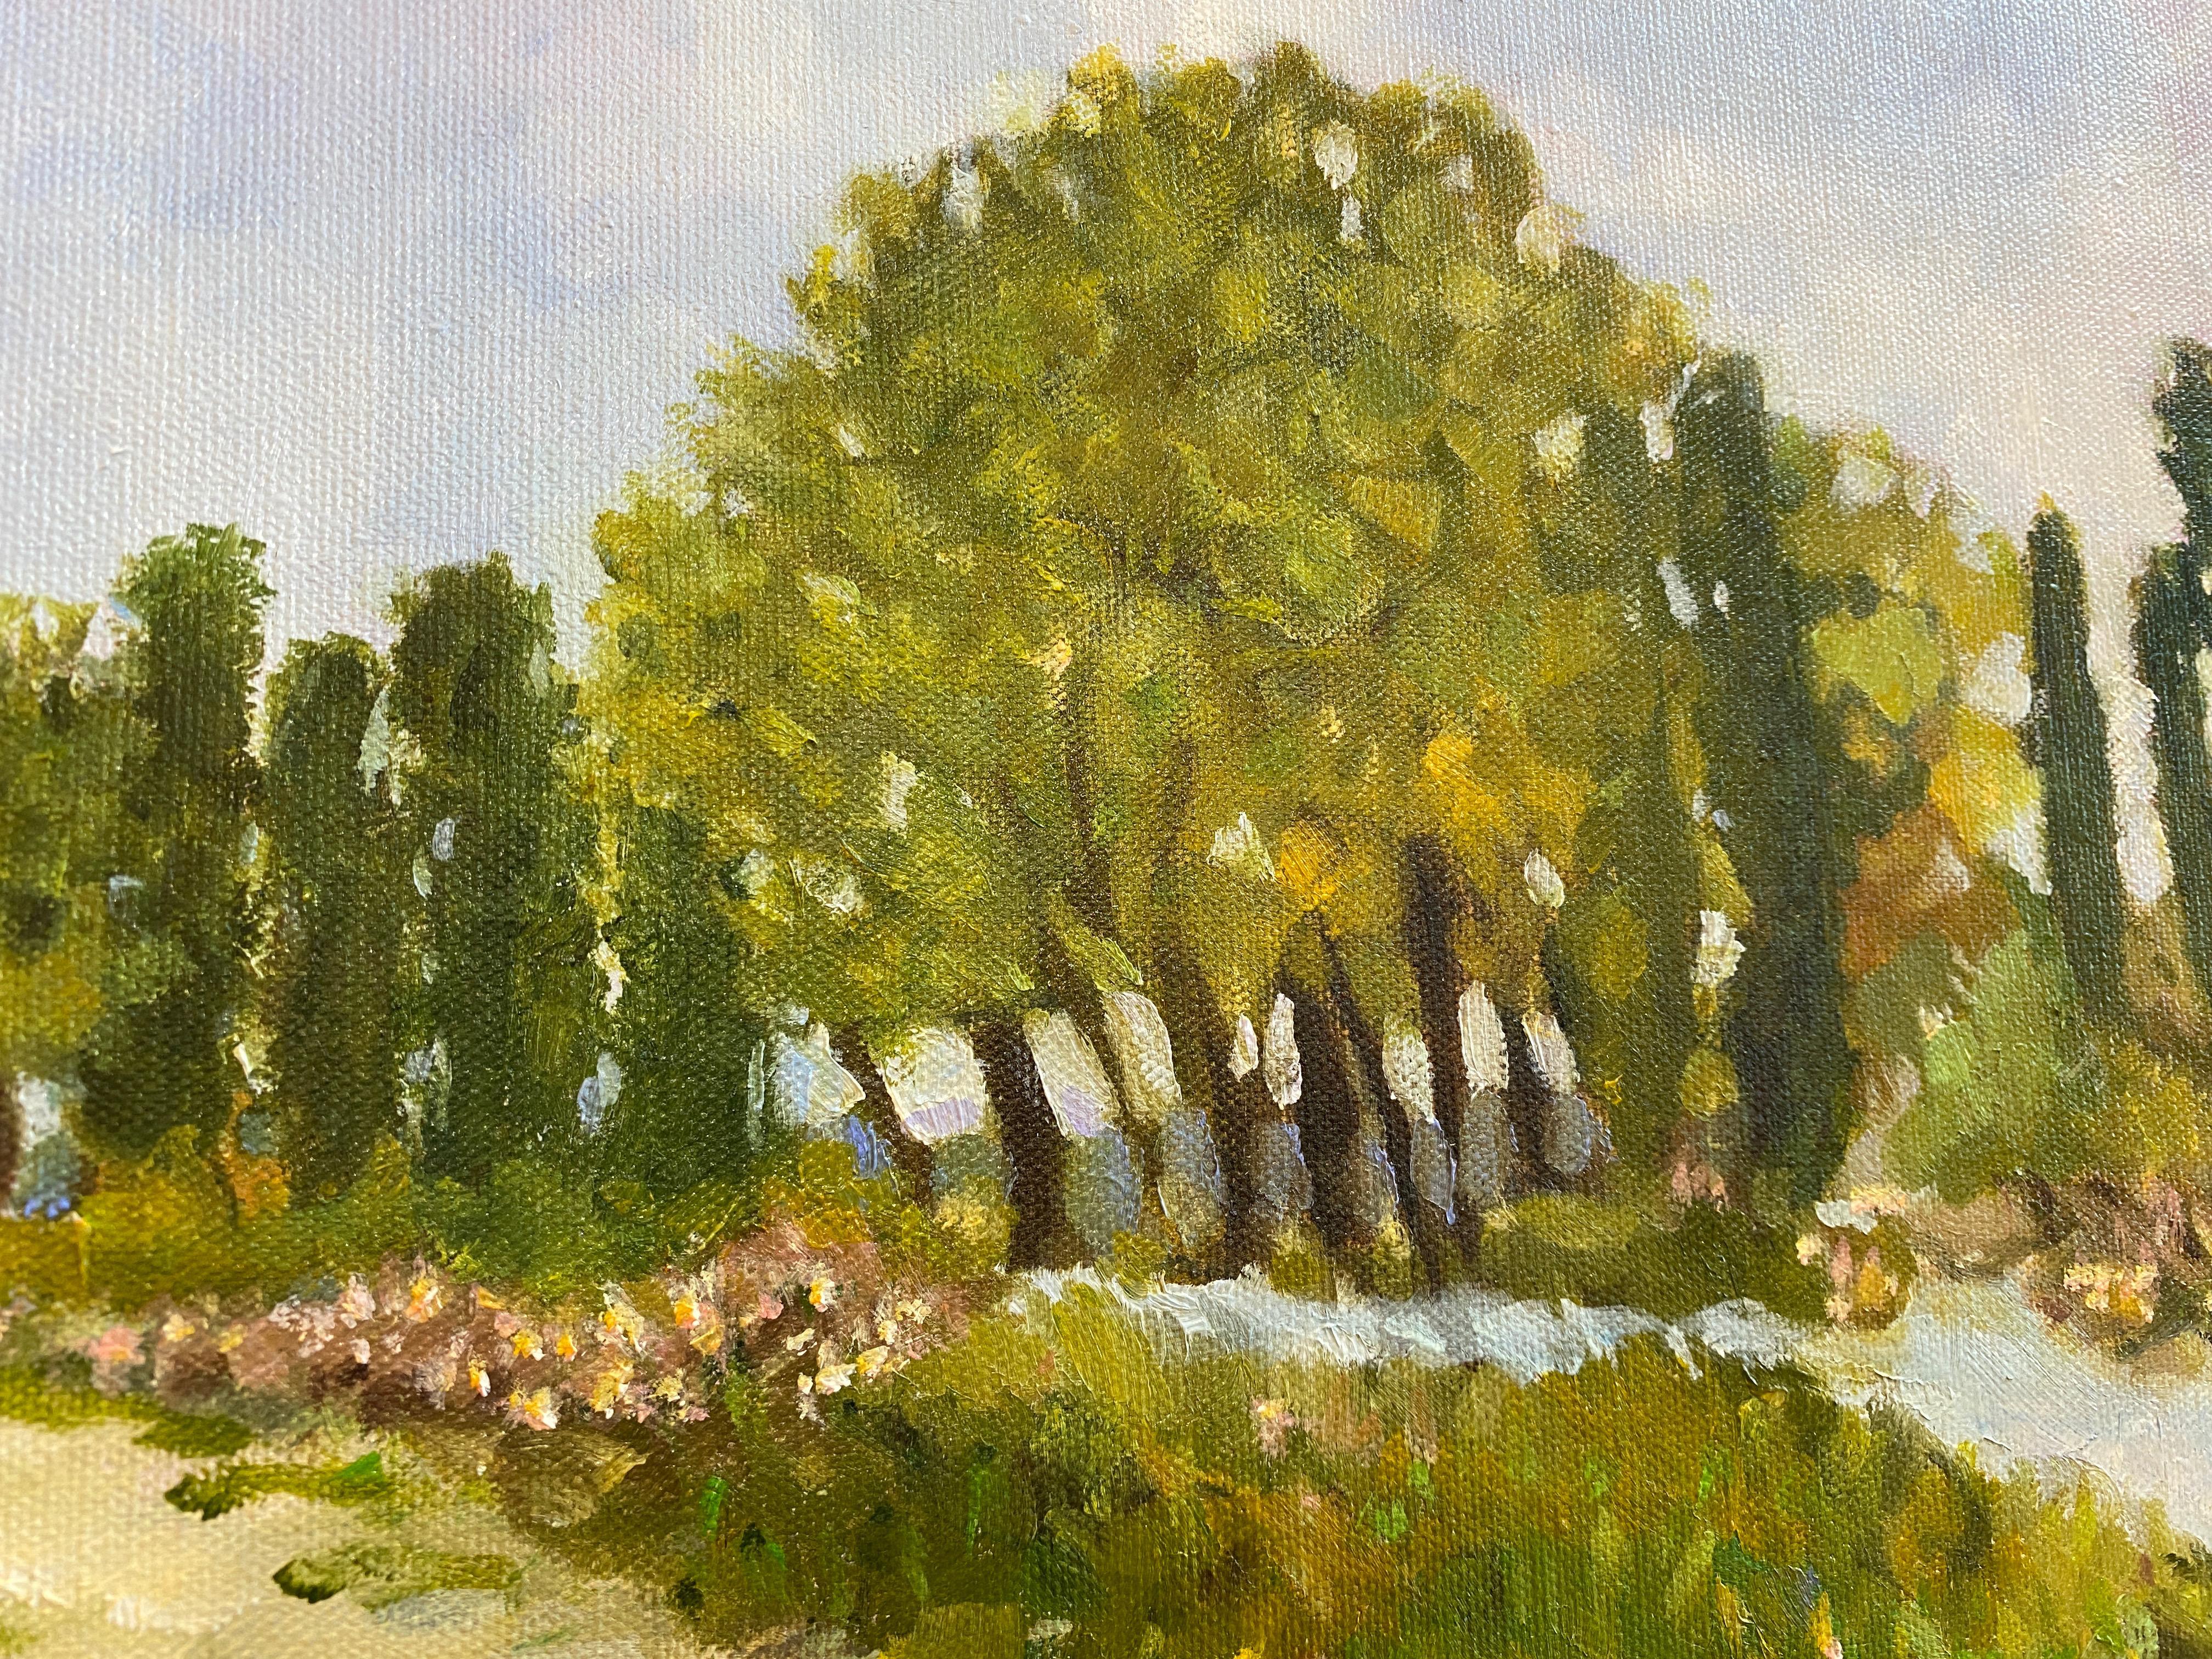 This landscape painting depicts a calm, serene water view with a predominant cumulus cloud-filled blue sky of summer. A green tree-lined beach lane with pink flowers is the central focus of the painting inviting the viewer to enter the sandy trail